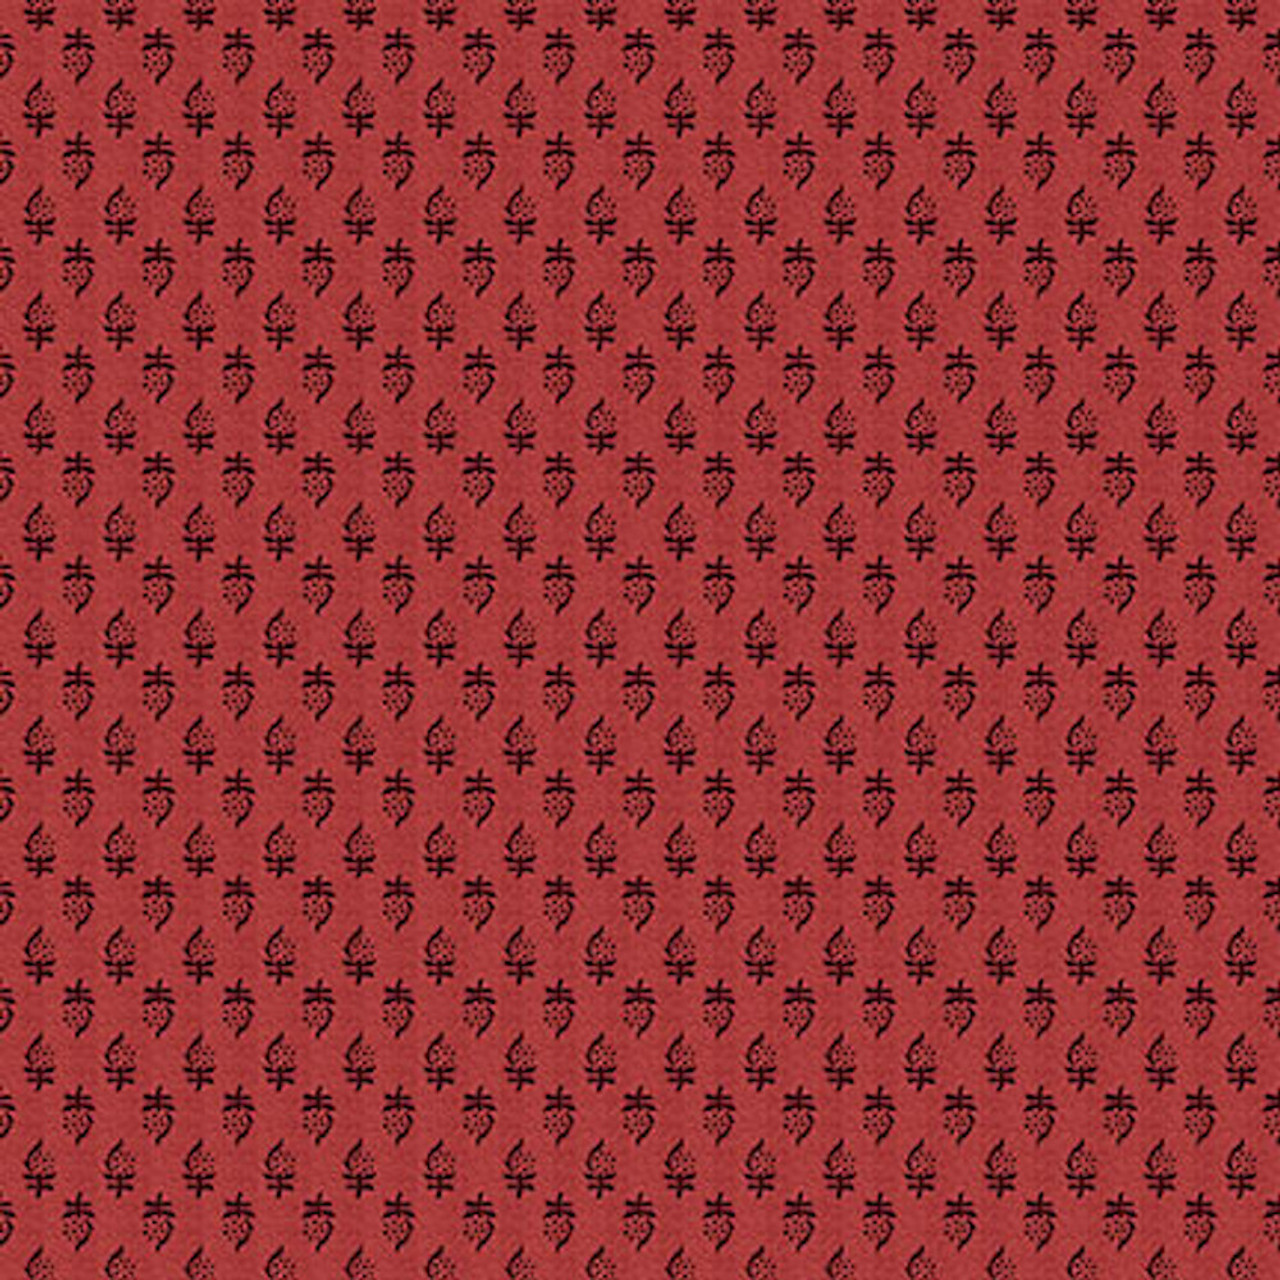 Henry Glass Froth & Bubble Foulard Red Cotton Fabric By The Yard